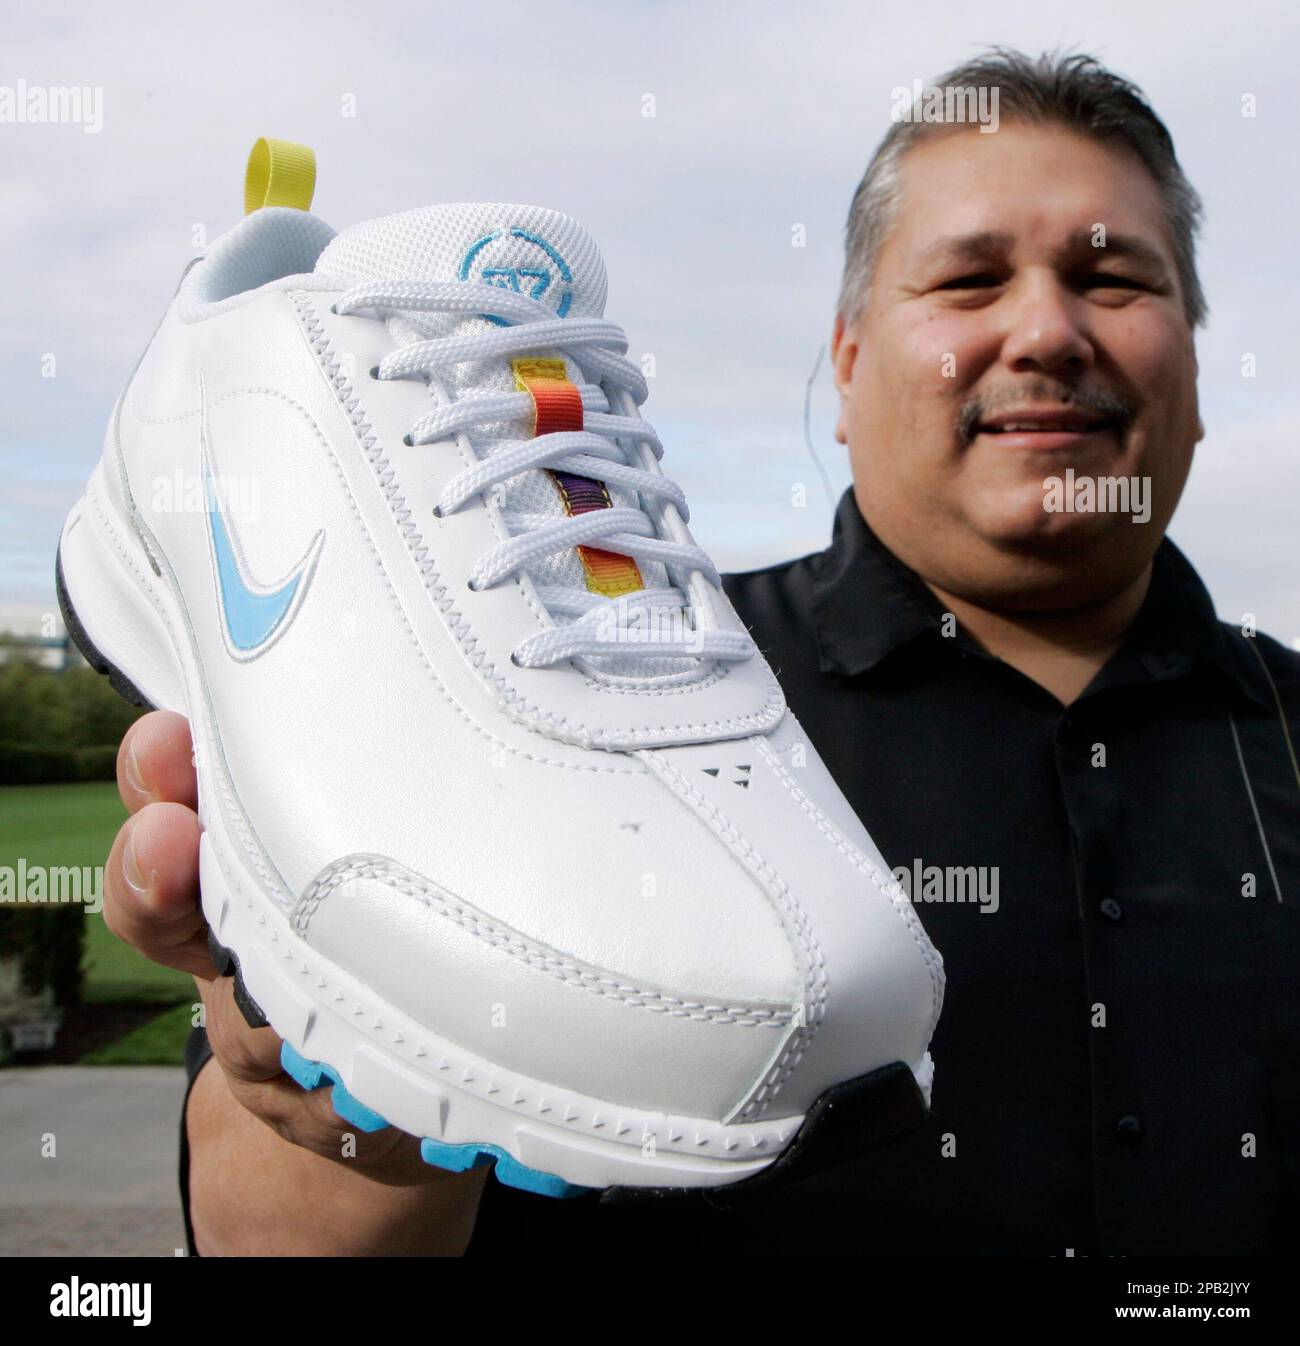 Pidgin roman voks Sam McCracken, manager of Nike's Native American business program, shows  the new Nike Air Native N7 shoe at Nike headquarters in Beaverton, Ore.,  Tuesday, Sept. 25, 2007. Nike unveiled the new shoe